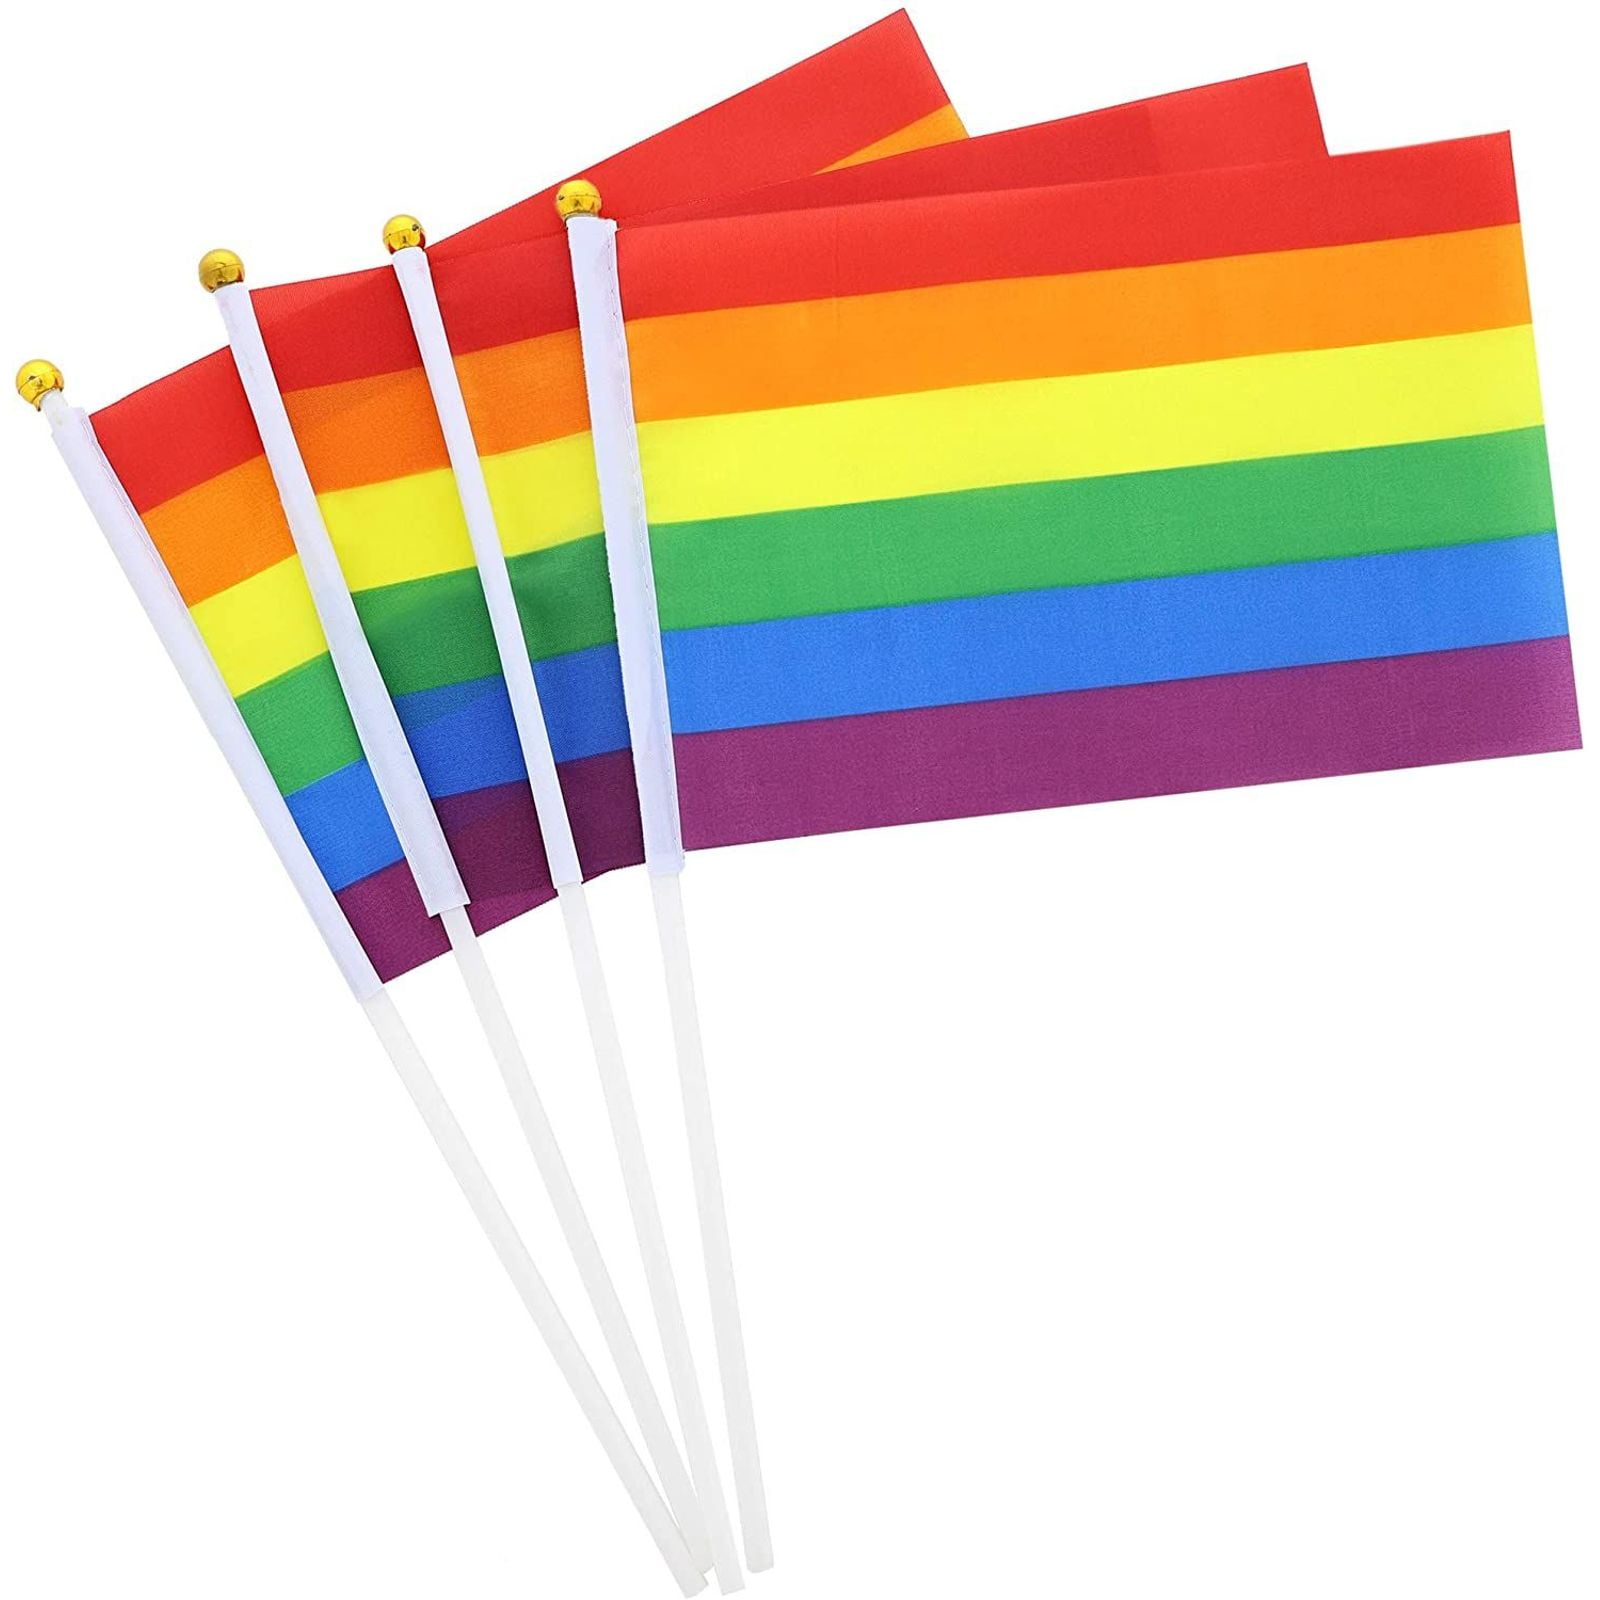 1-12 PACK WHISTLE WITH RAINBOW CORD GAY PRIDE LGBT FESTIVAL RAVE PARTY CARNIVAL 